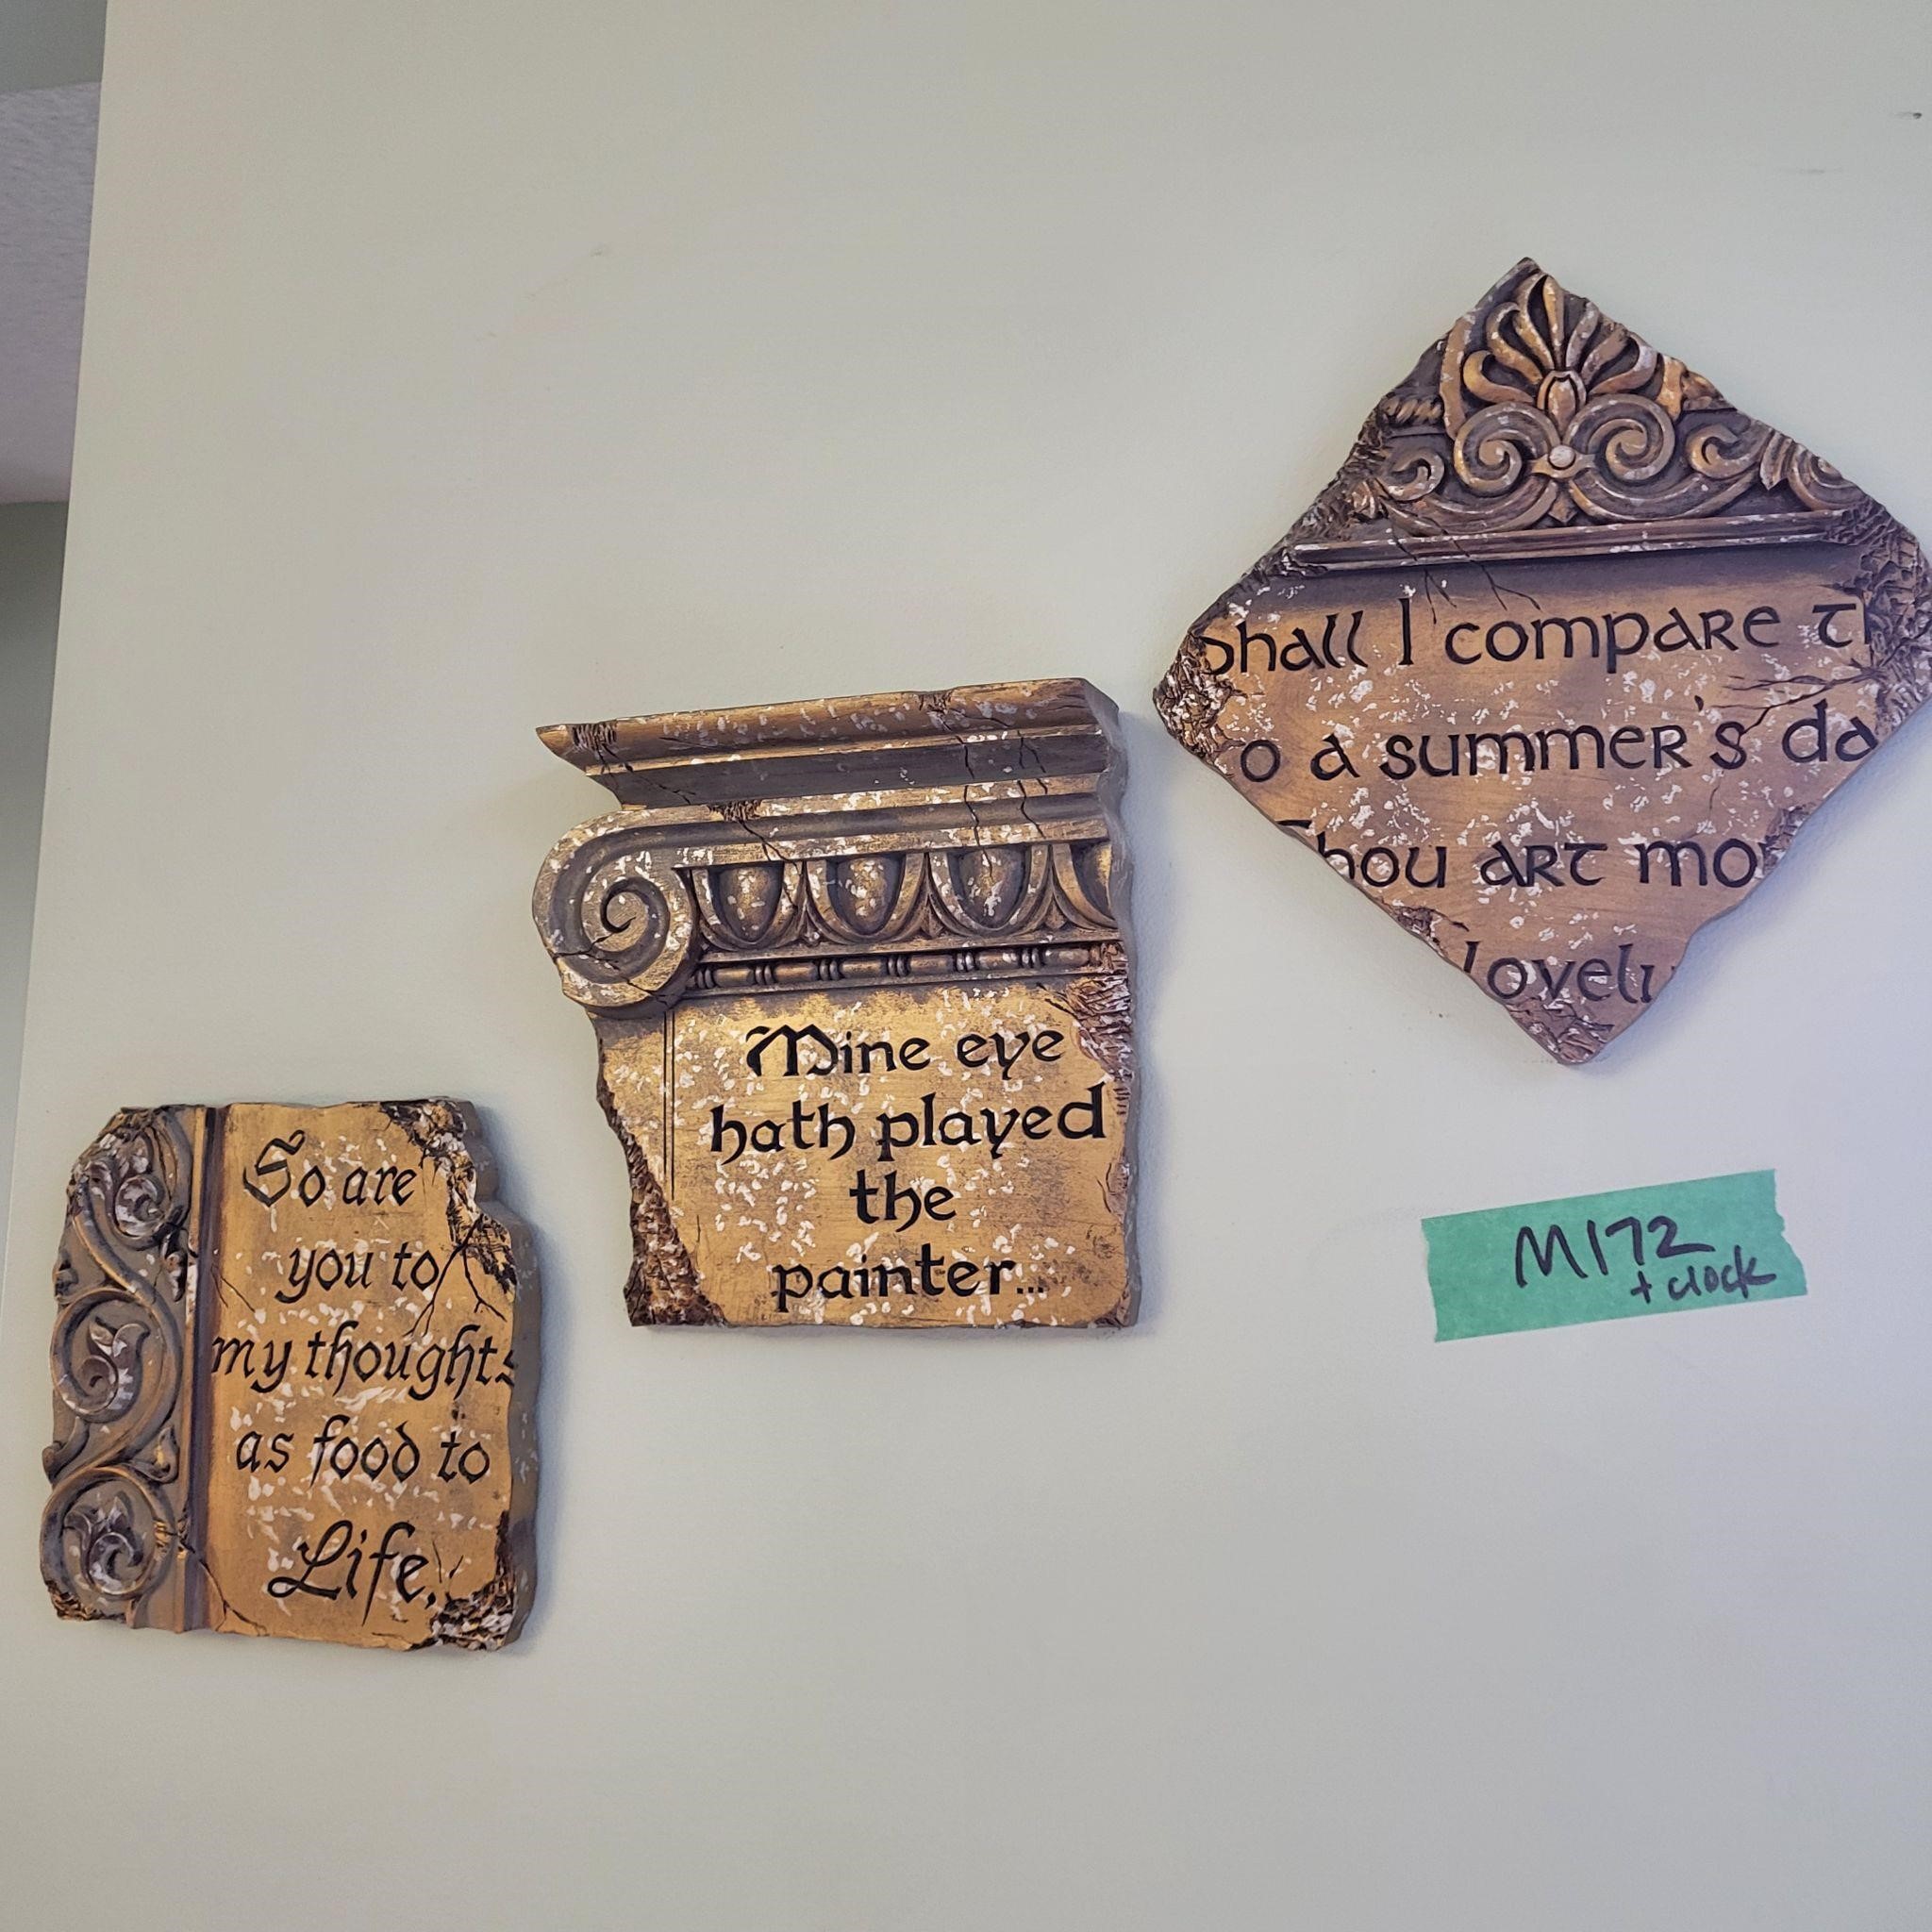 M172 Message Wall plaques and Clock